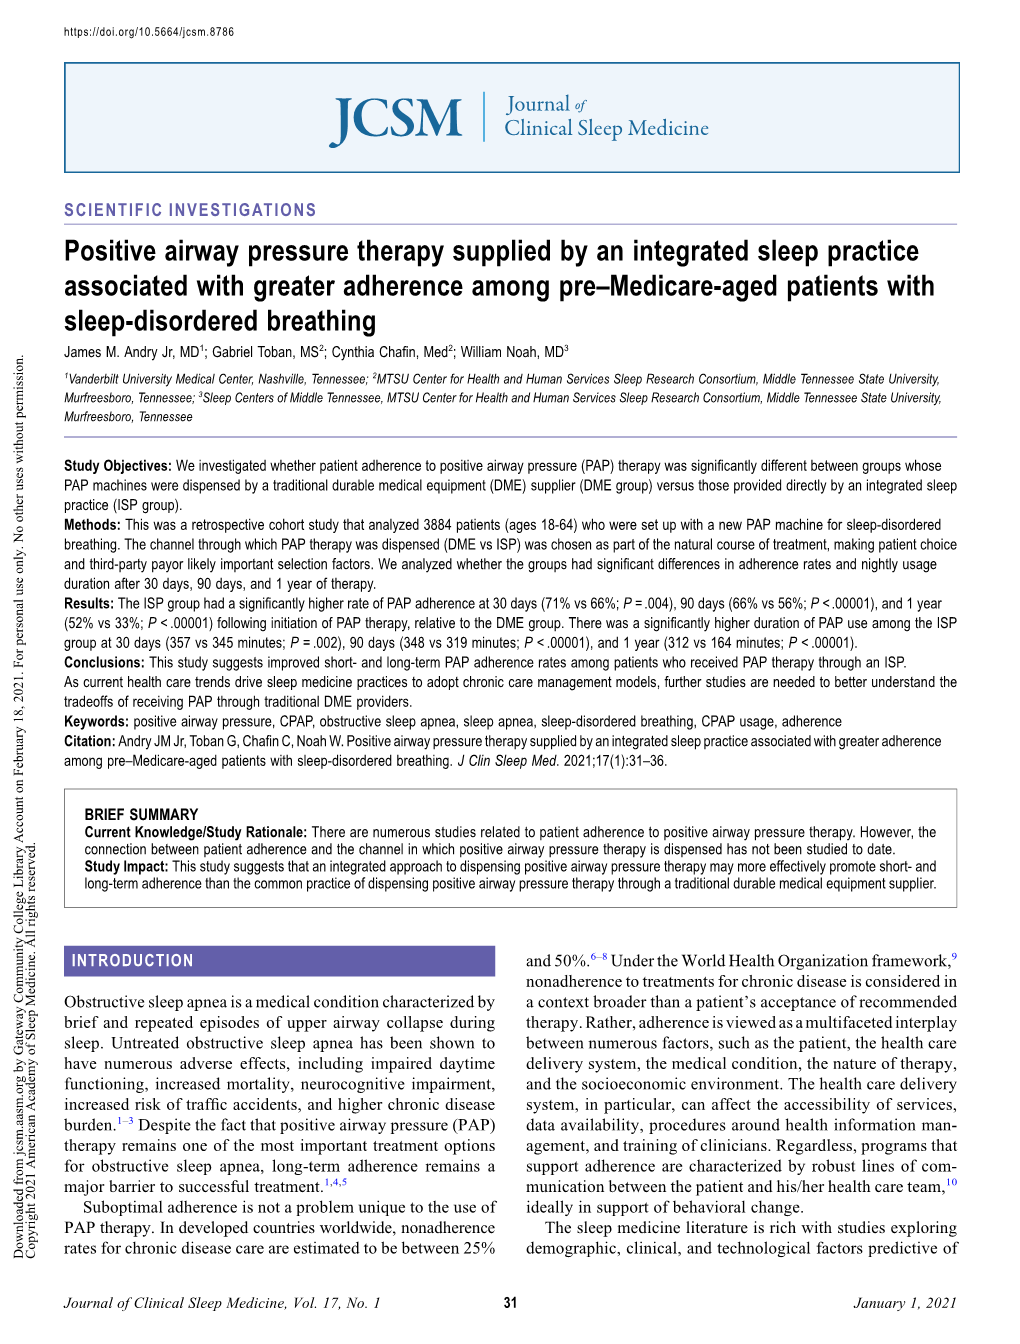 Positive Airway Pressure Therapy Supplied by an Integrated Sleep